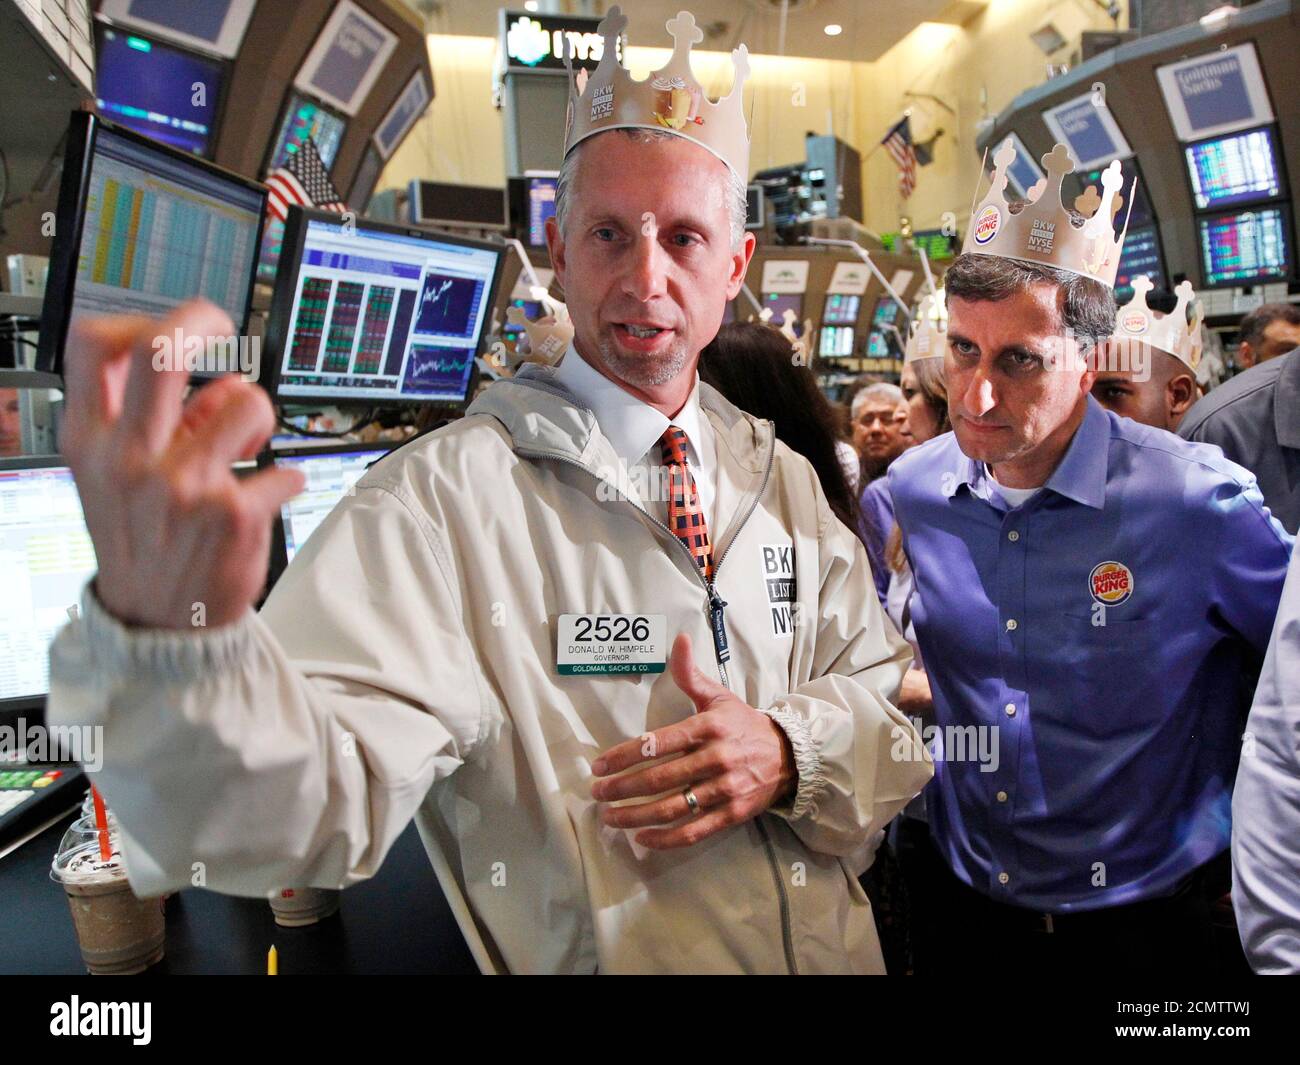 Burger King Corp. CEO Bernardo Hees (R) talks with specialist Donald Himpele (L) following his company's stock began trading at the New York Stock Exchange June 20, 2012. Shares of Burger King Worldwide Holdings Inc opened at $14.50 on Wednesday, as it started its first round of trading, less than two years of going private in a $3.26 billion sale to Brazilian investment fund 3G Capital Management LLC. REUTERS/Brendan McDermid (UNITED STATES - Tags: FOOD BUSINESS) Stock Photo